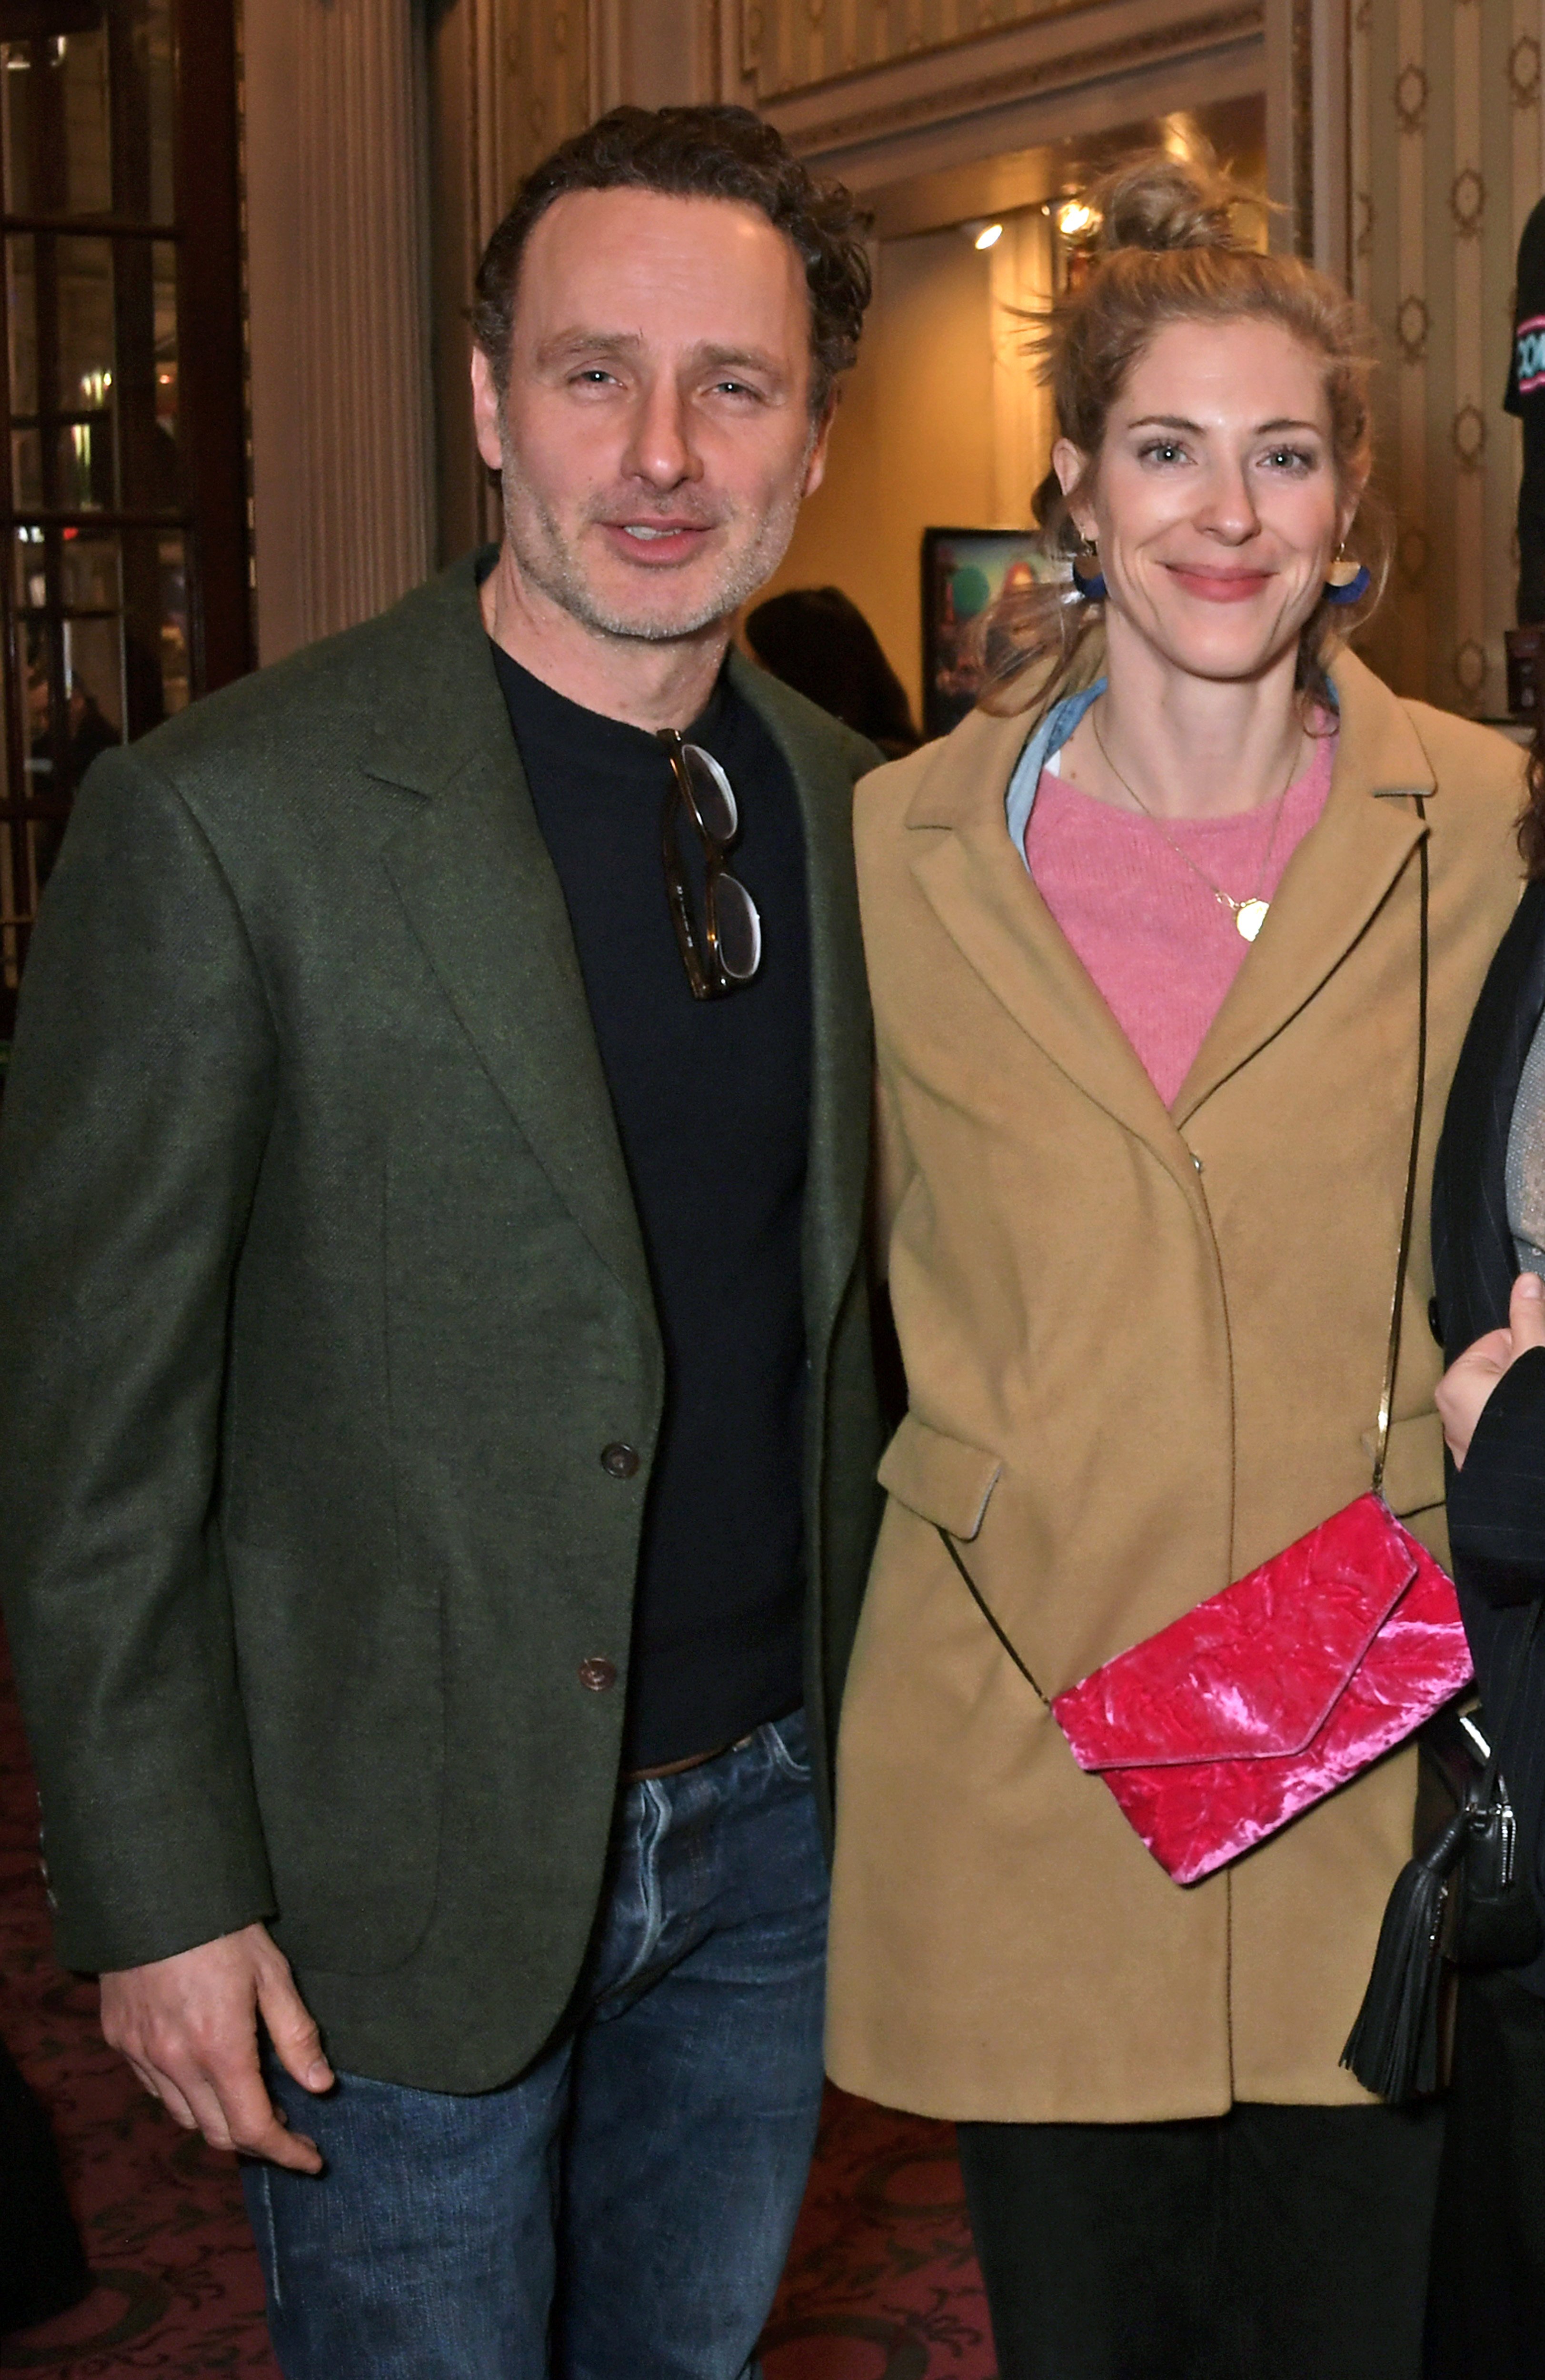 Andrew Lincoln and Gael Anderson at a performance of "Company" in London on February 11, 2019 | Source: Getty Images